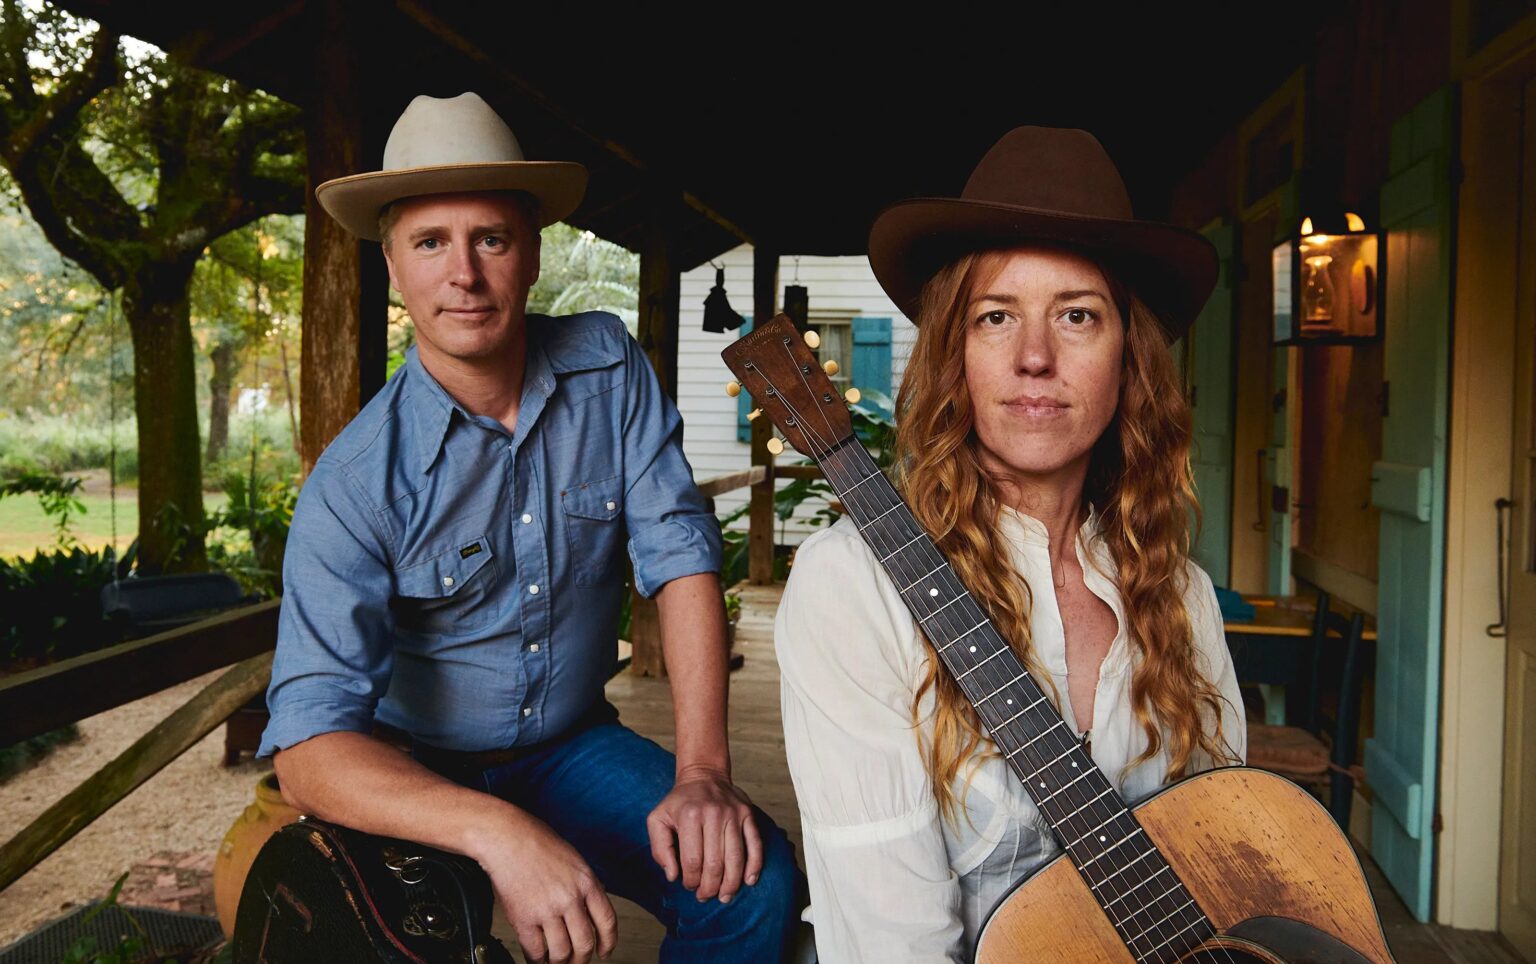 Highlights at the Bellingham Folk Festival include a performance by Portland-based traditional country duo Reeb & Caleb Friday